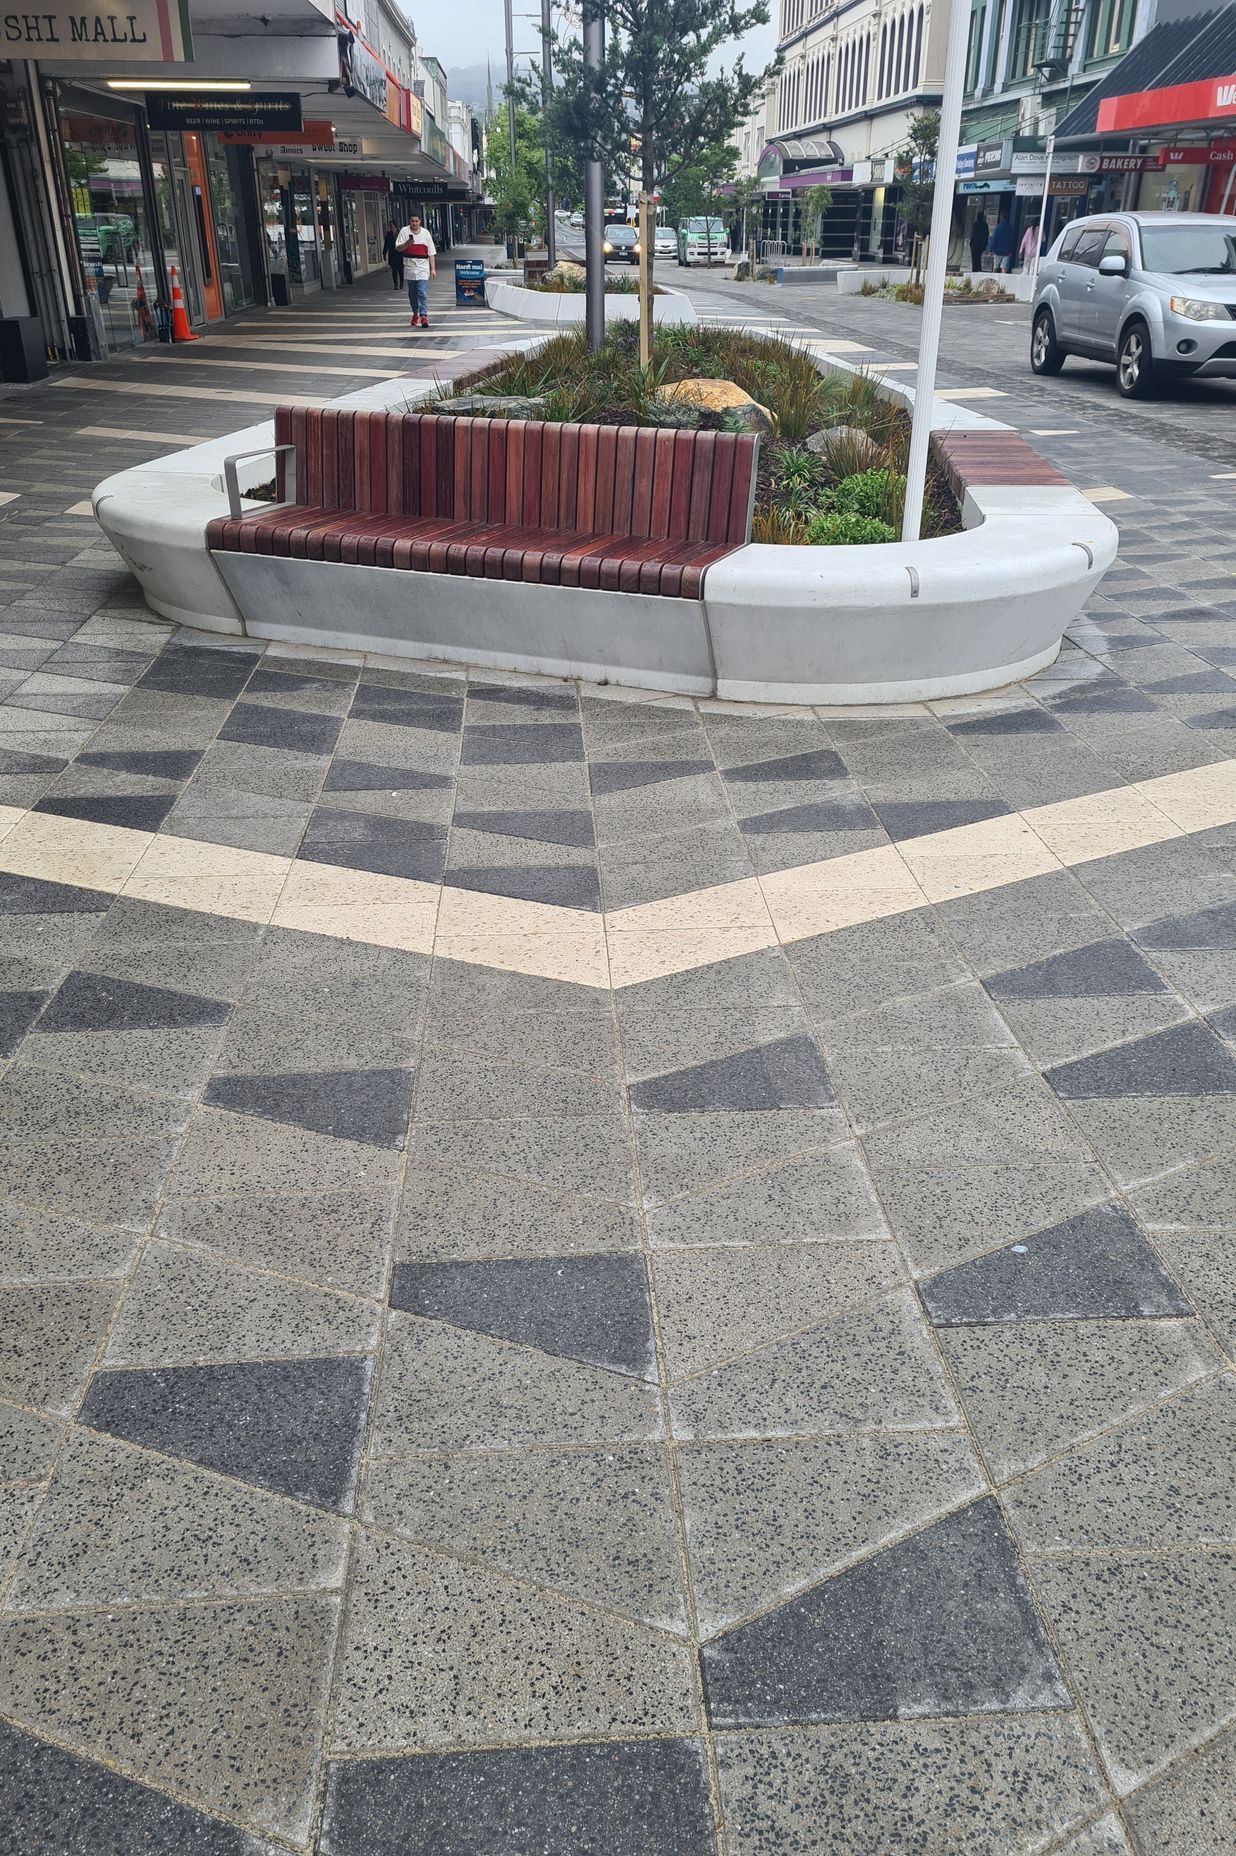 The streetscape offers places to sit and enjoy the paving patterns and through them learn more about the area's history.